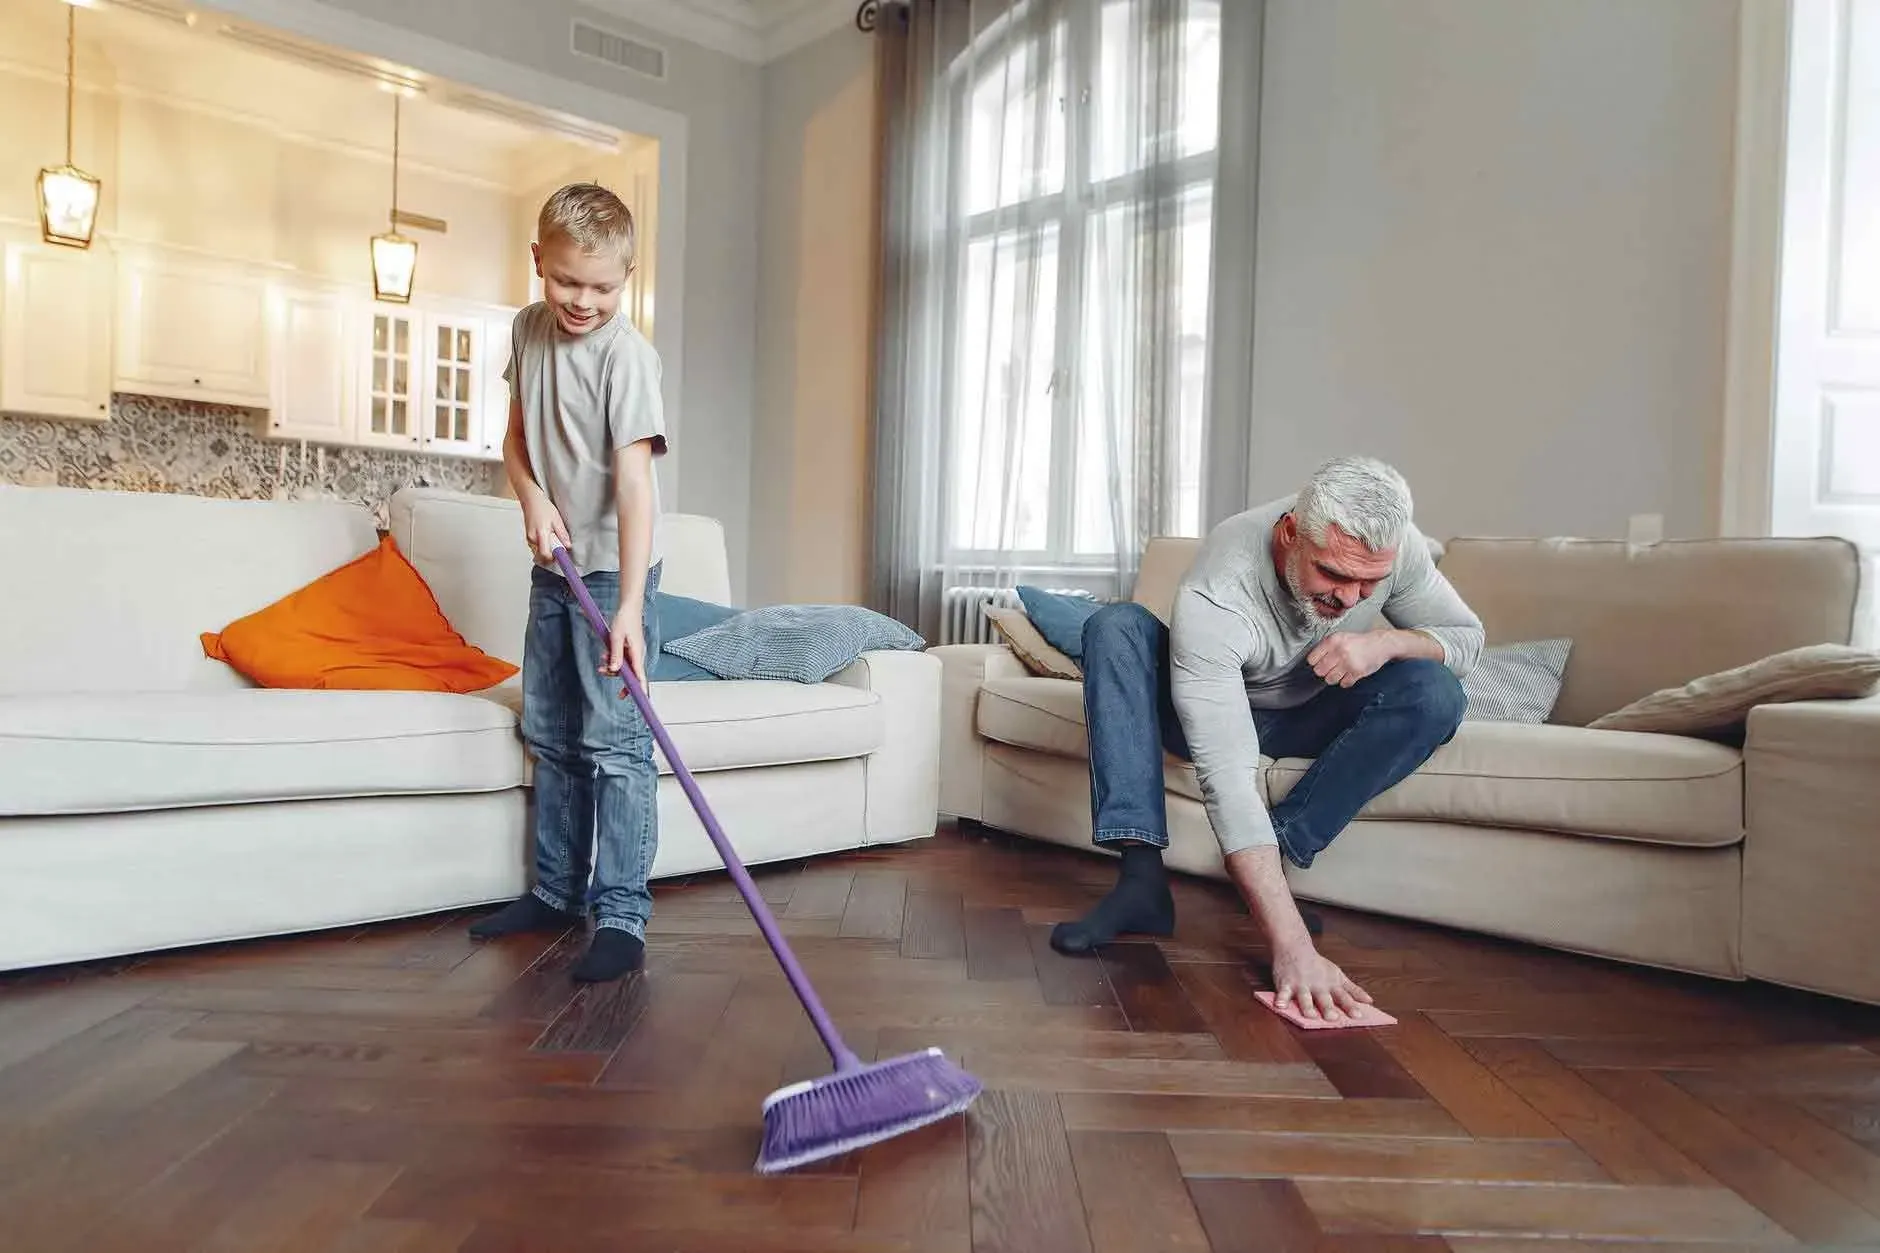 Divide your household chores and make cleaning more fun!